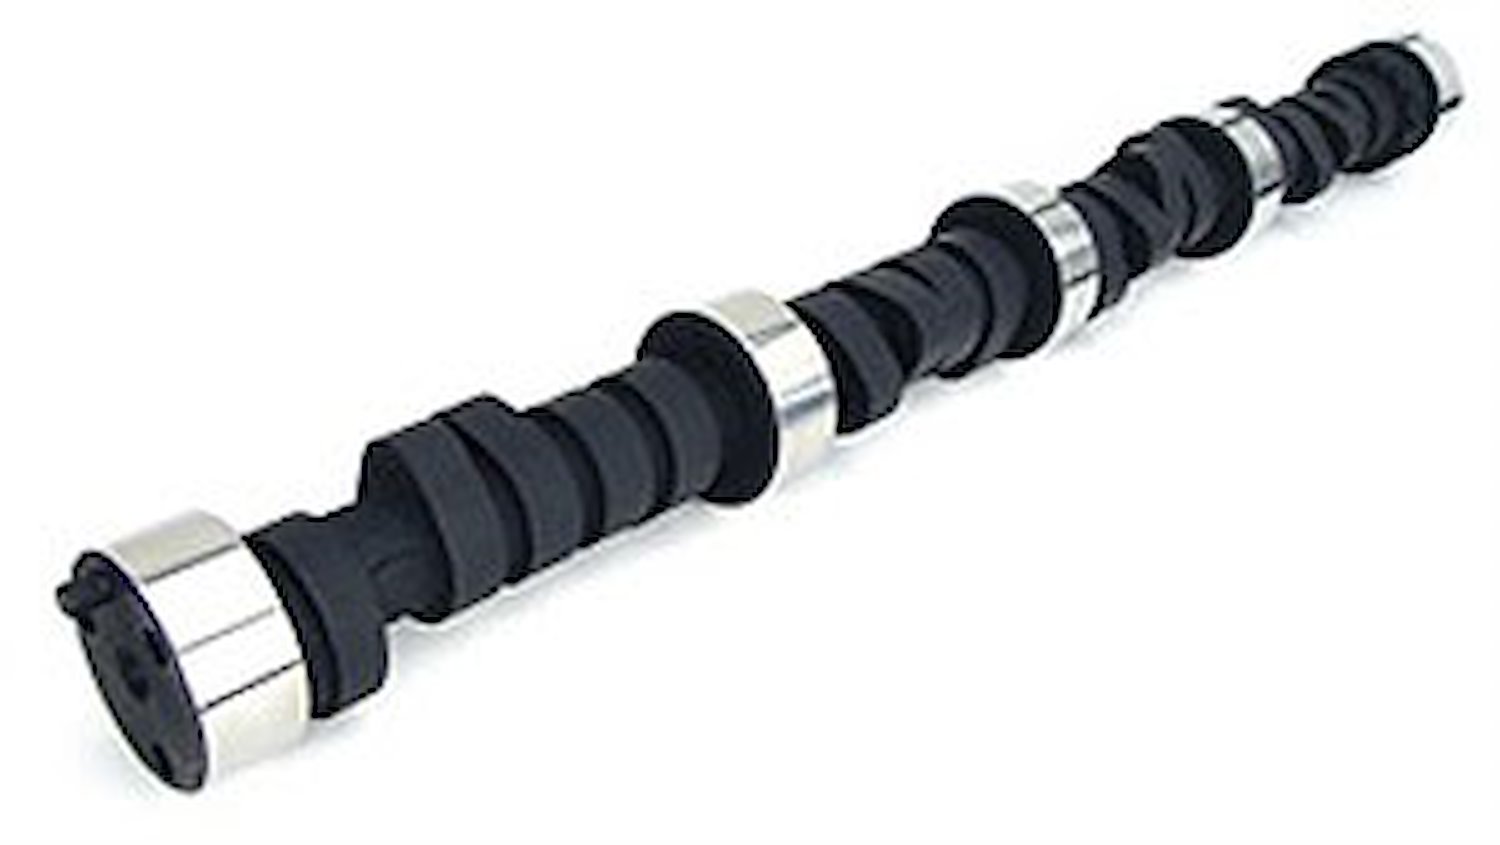 Xtreme Energy 262H Hydraulic Flat Tappet Camshaft Only Lift .464"/.470" Duration 262°/270° RPM Range 1500-5500